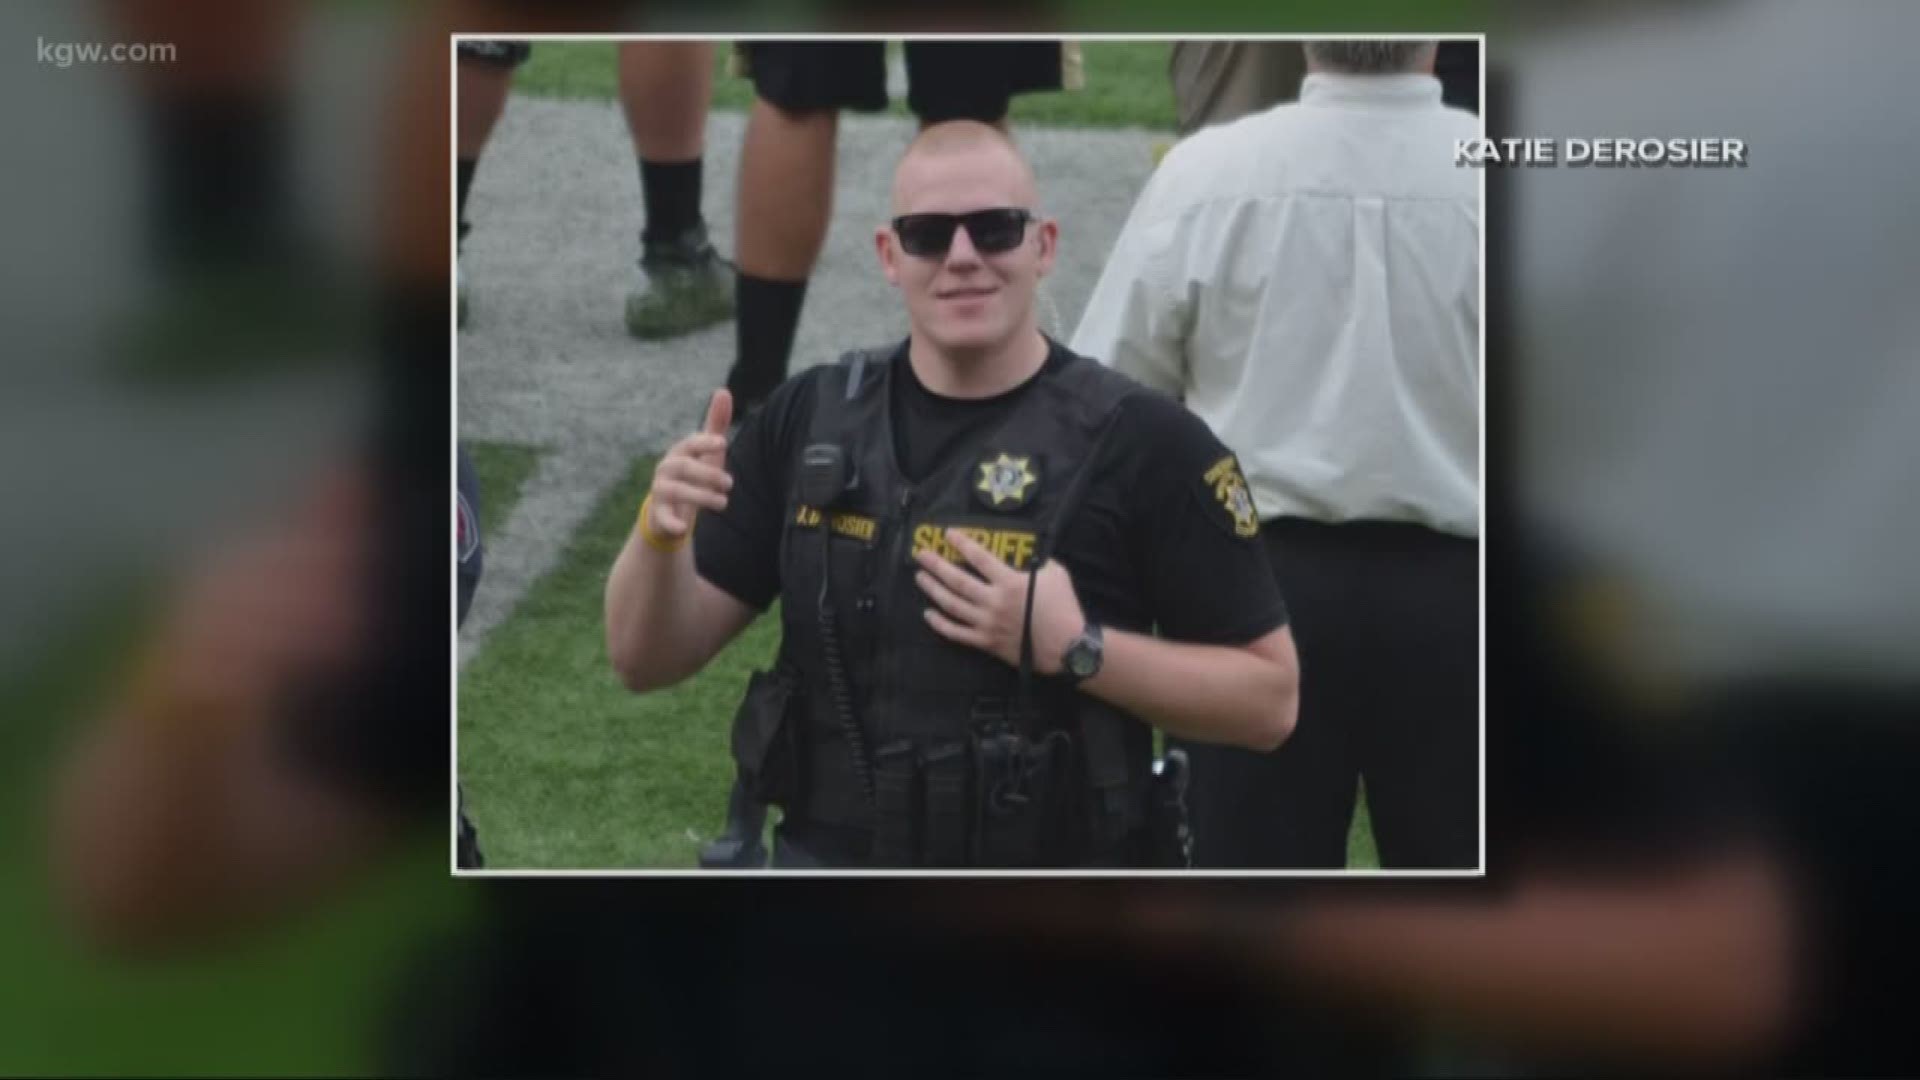 How a community is trying to heal after the killing of Cowlitz County sheriff’s deputy Justin Derosier.